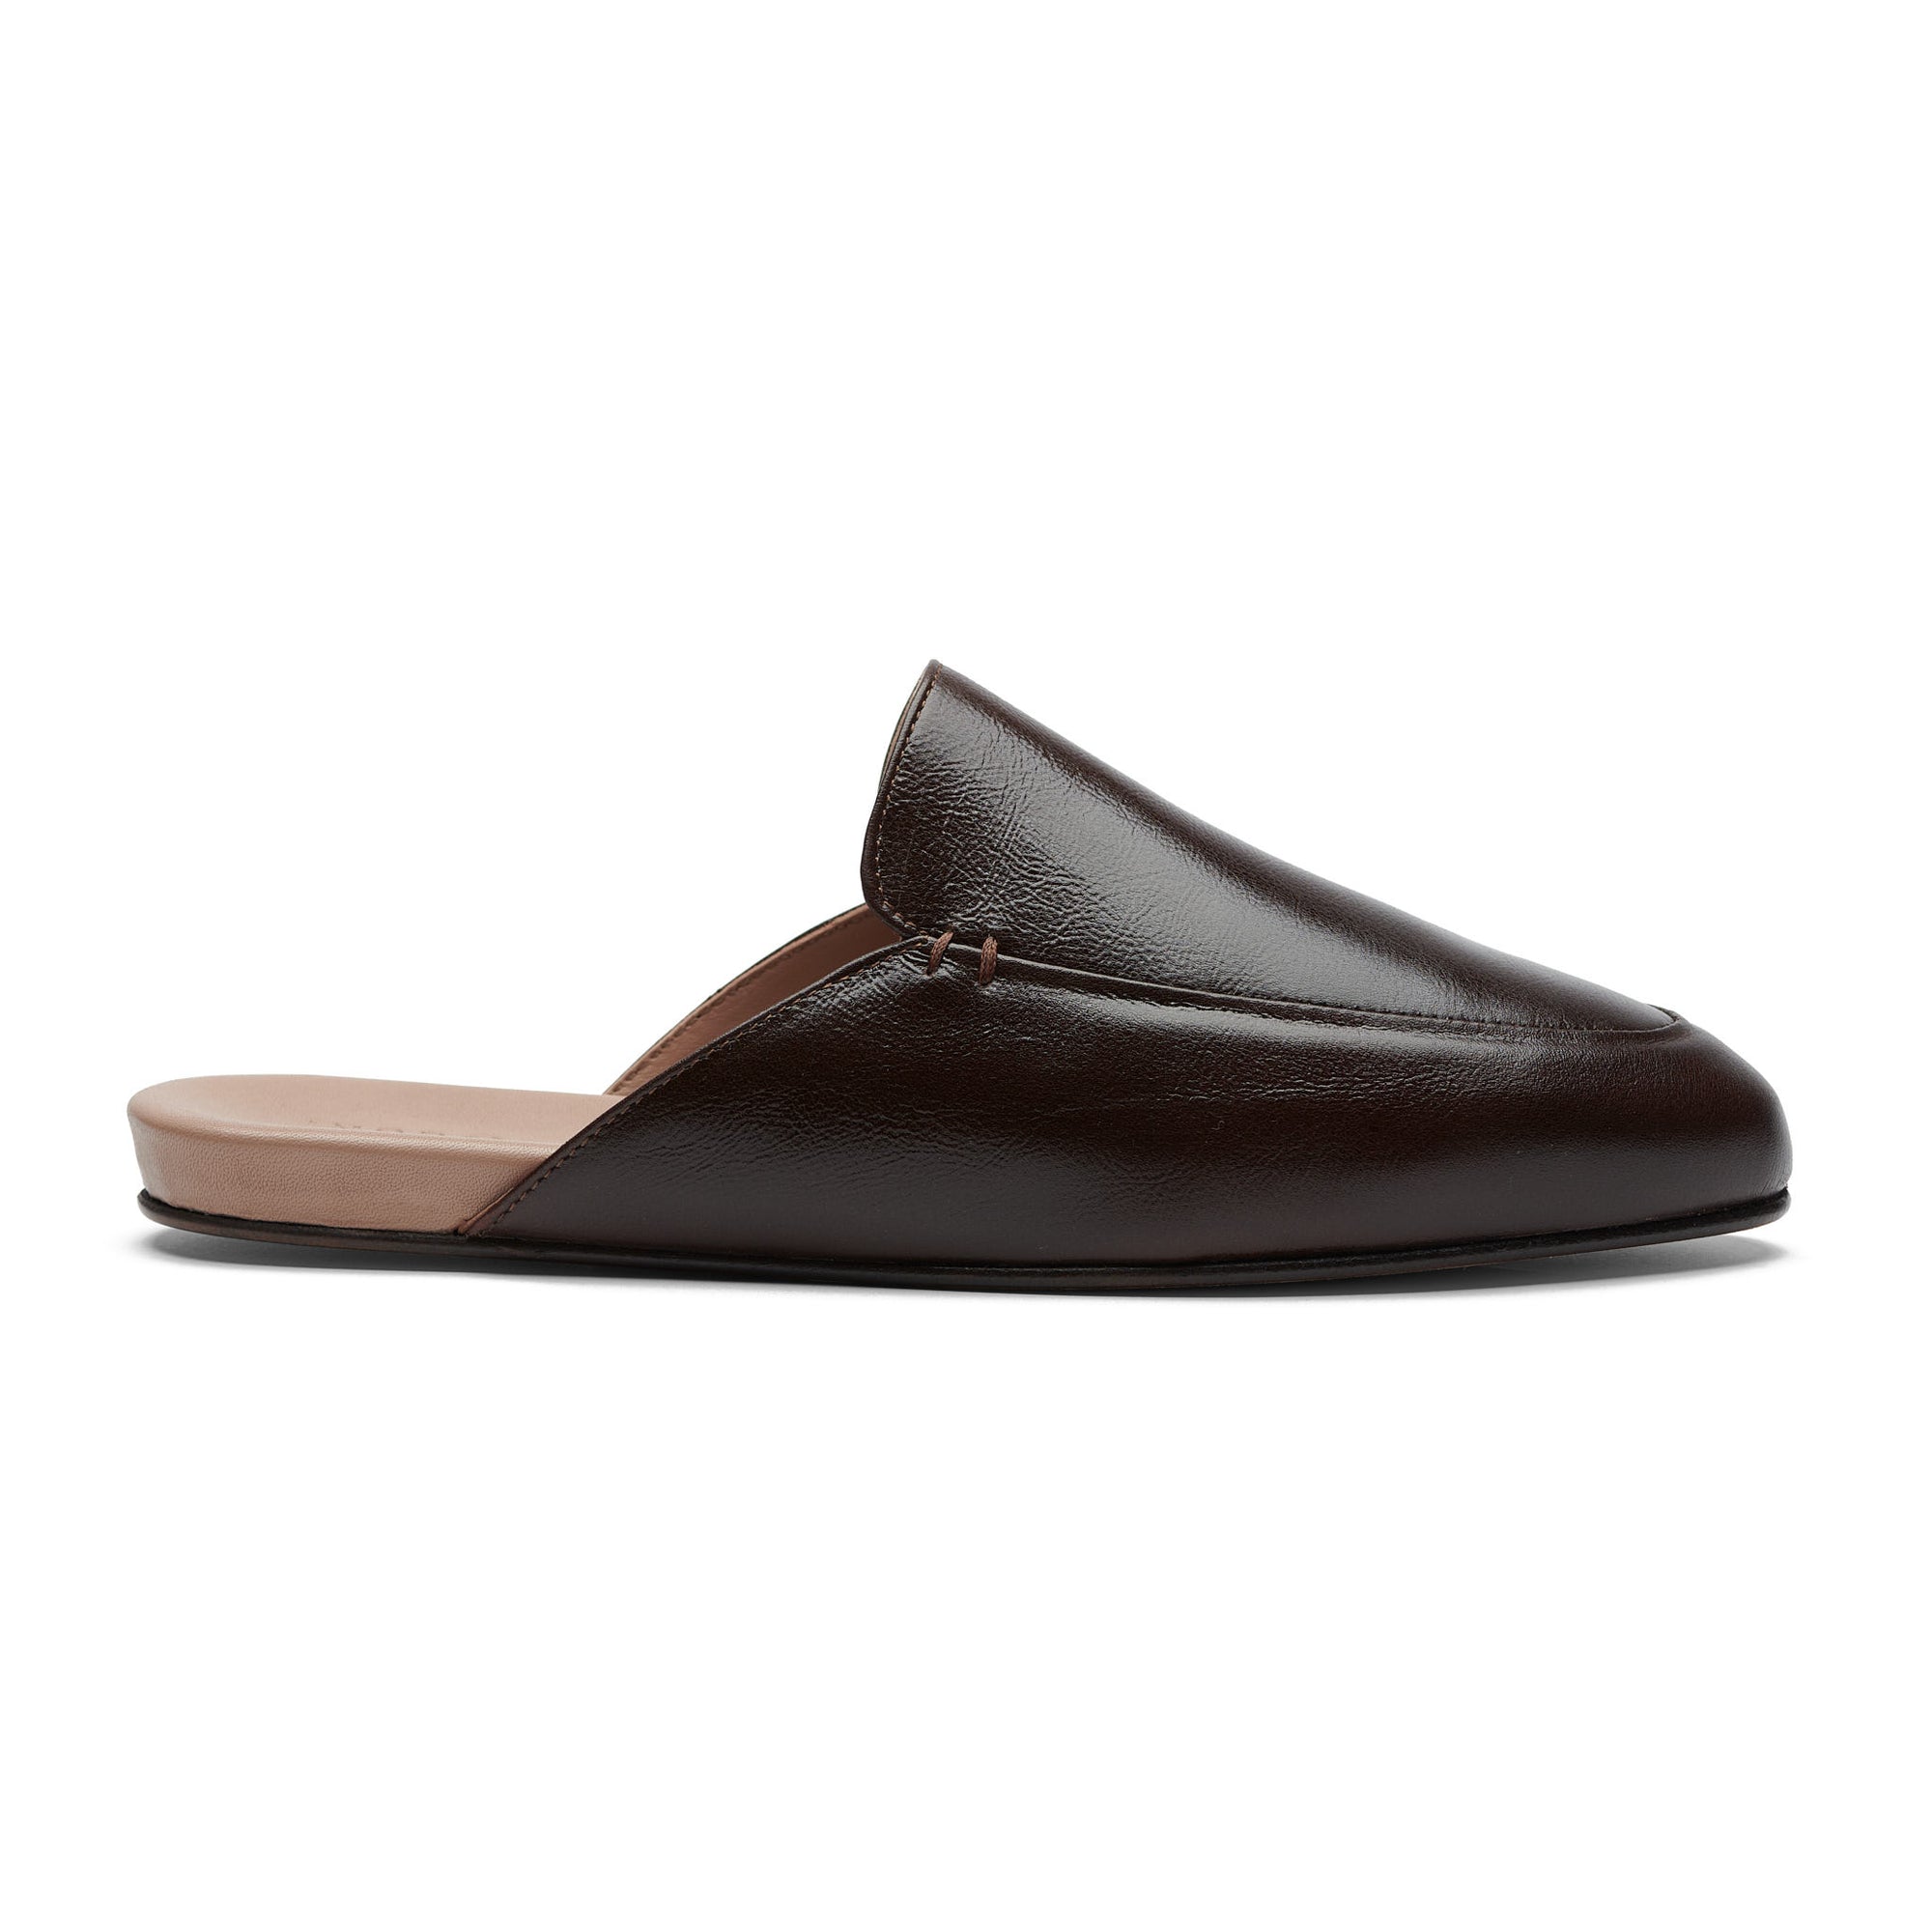 Women's Brown Patent Leather Slipper